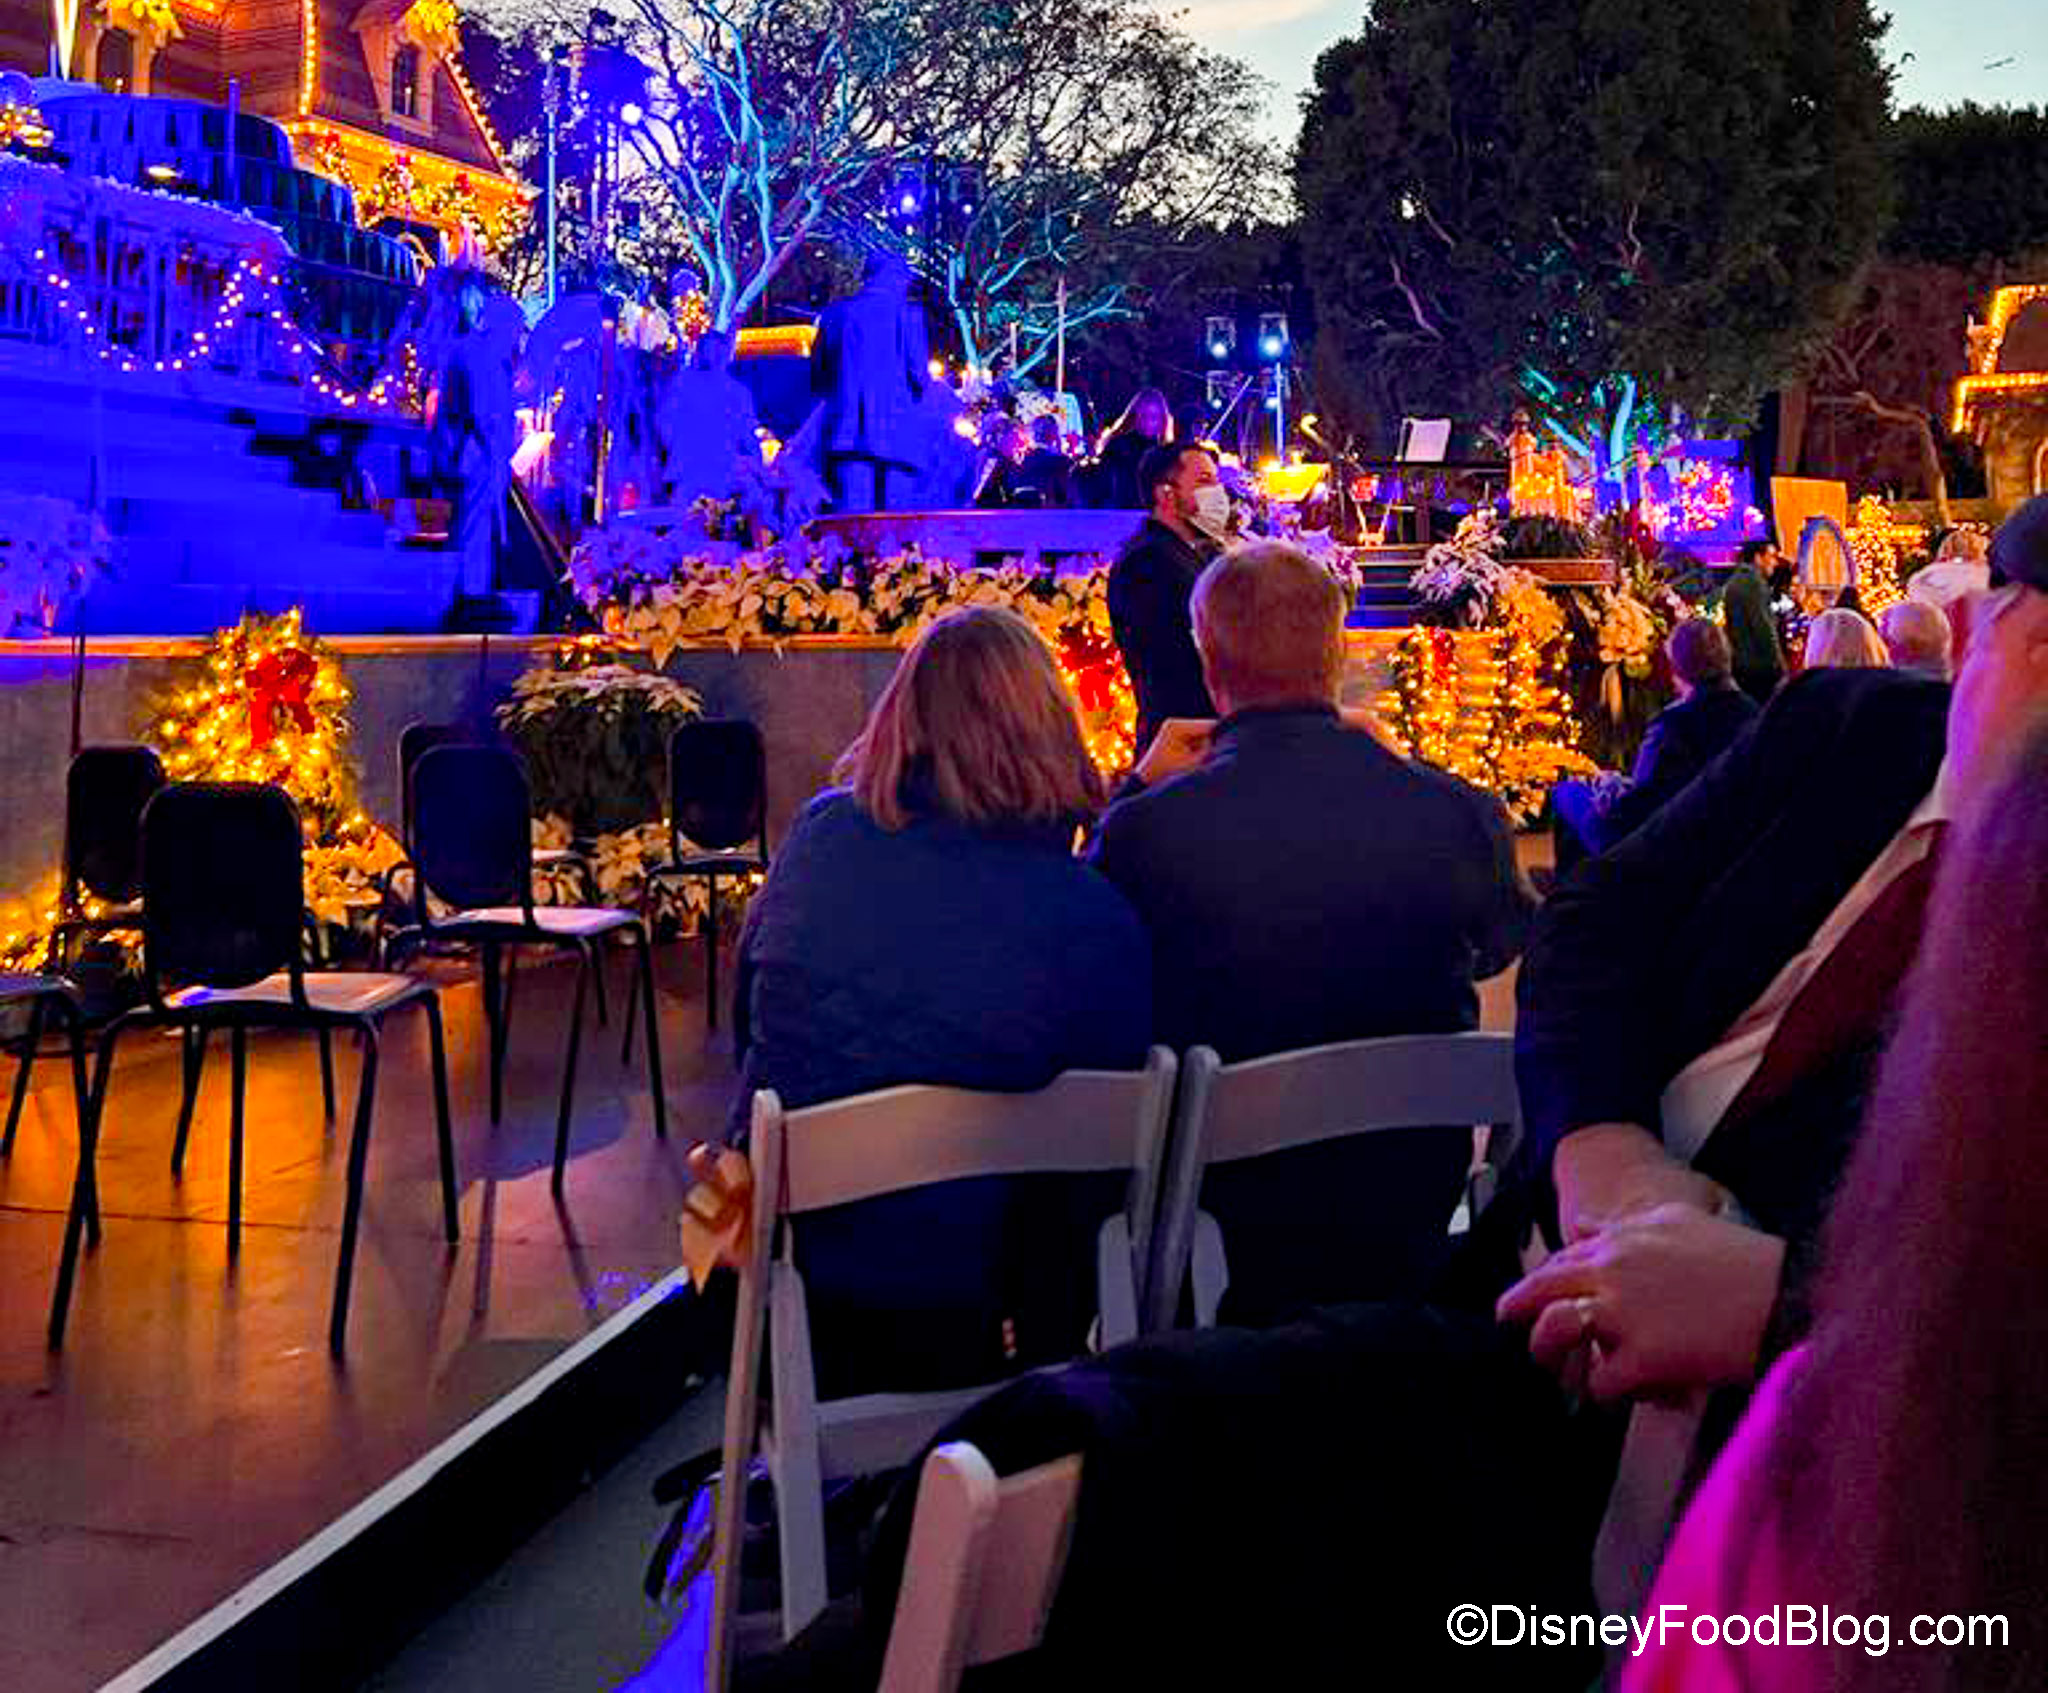 PHOTOS The Candlelight Processional Returns to Disneyland Disney by Mark